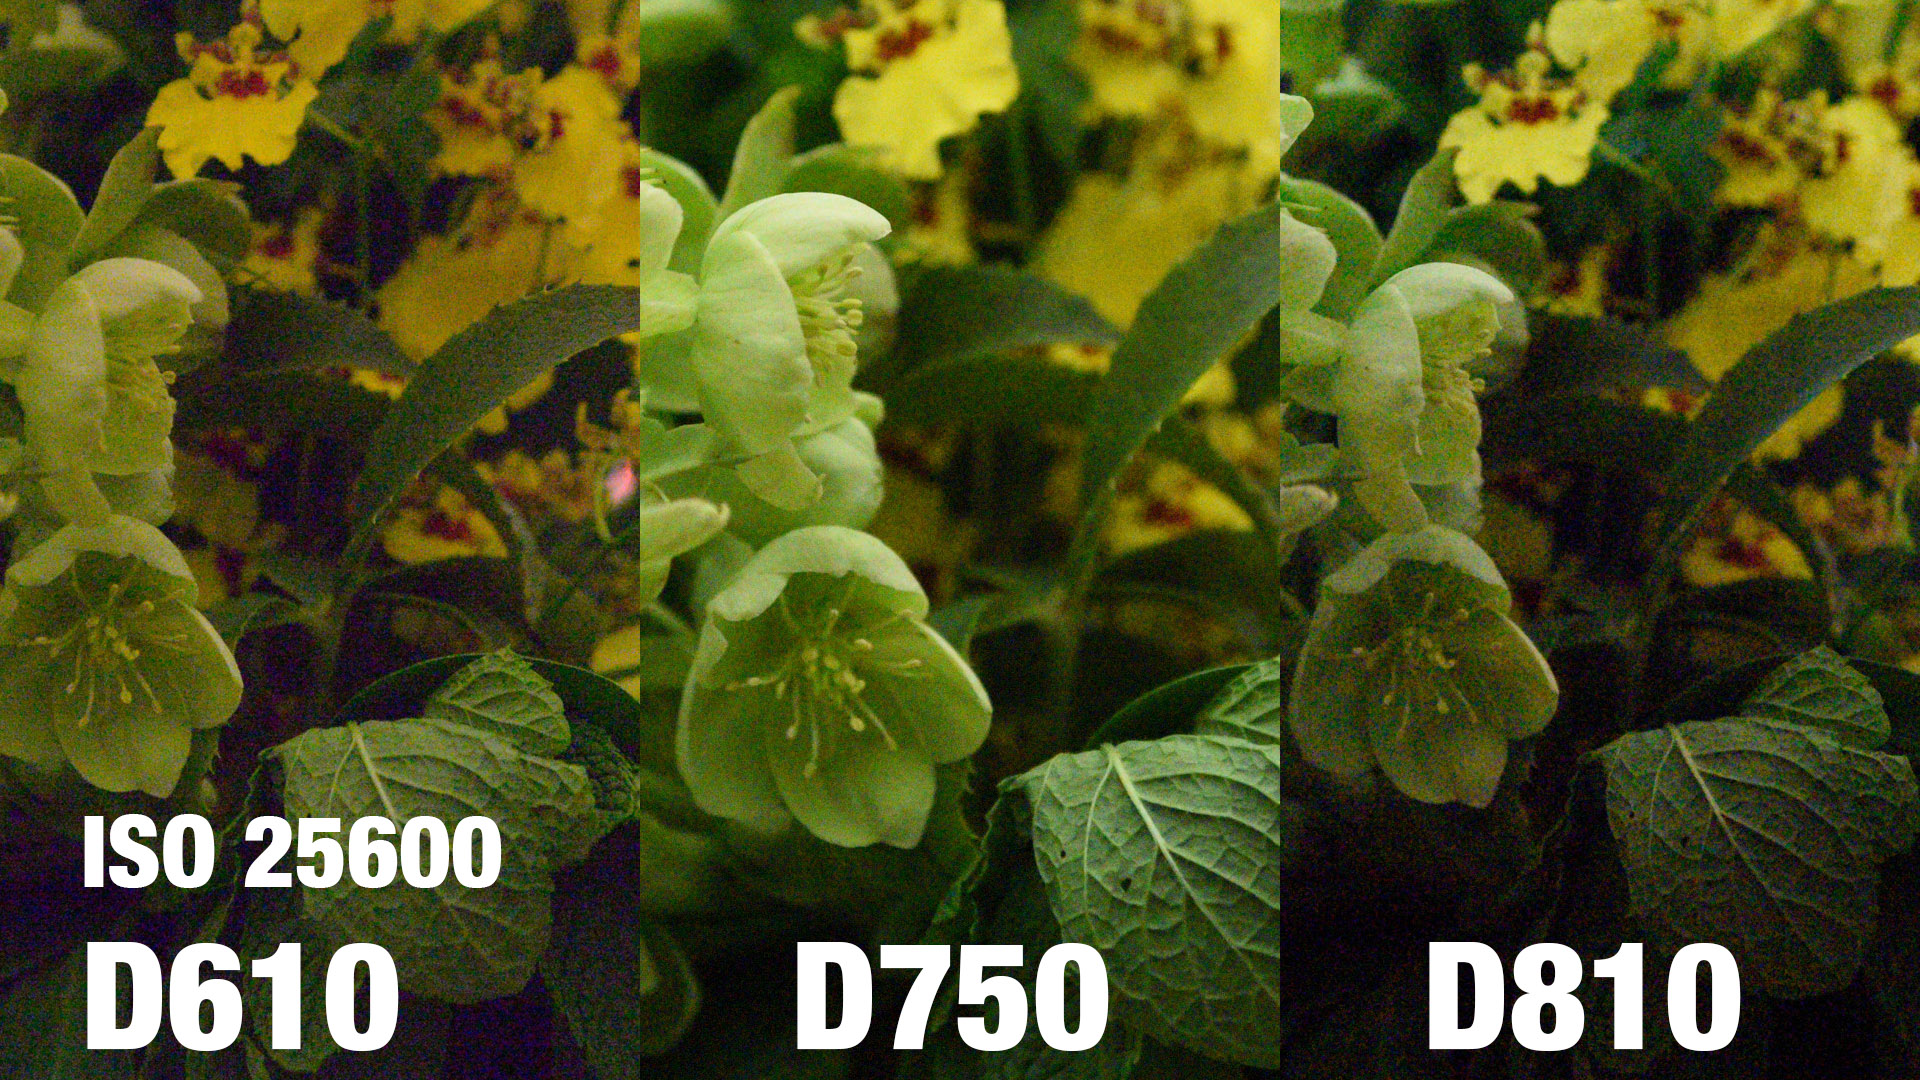 High ISO comparison between the D610, D750 and D810